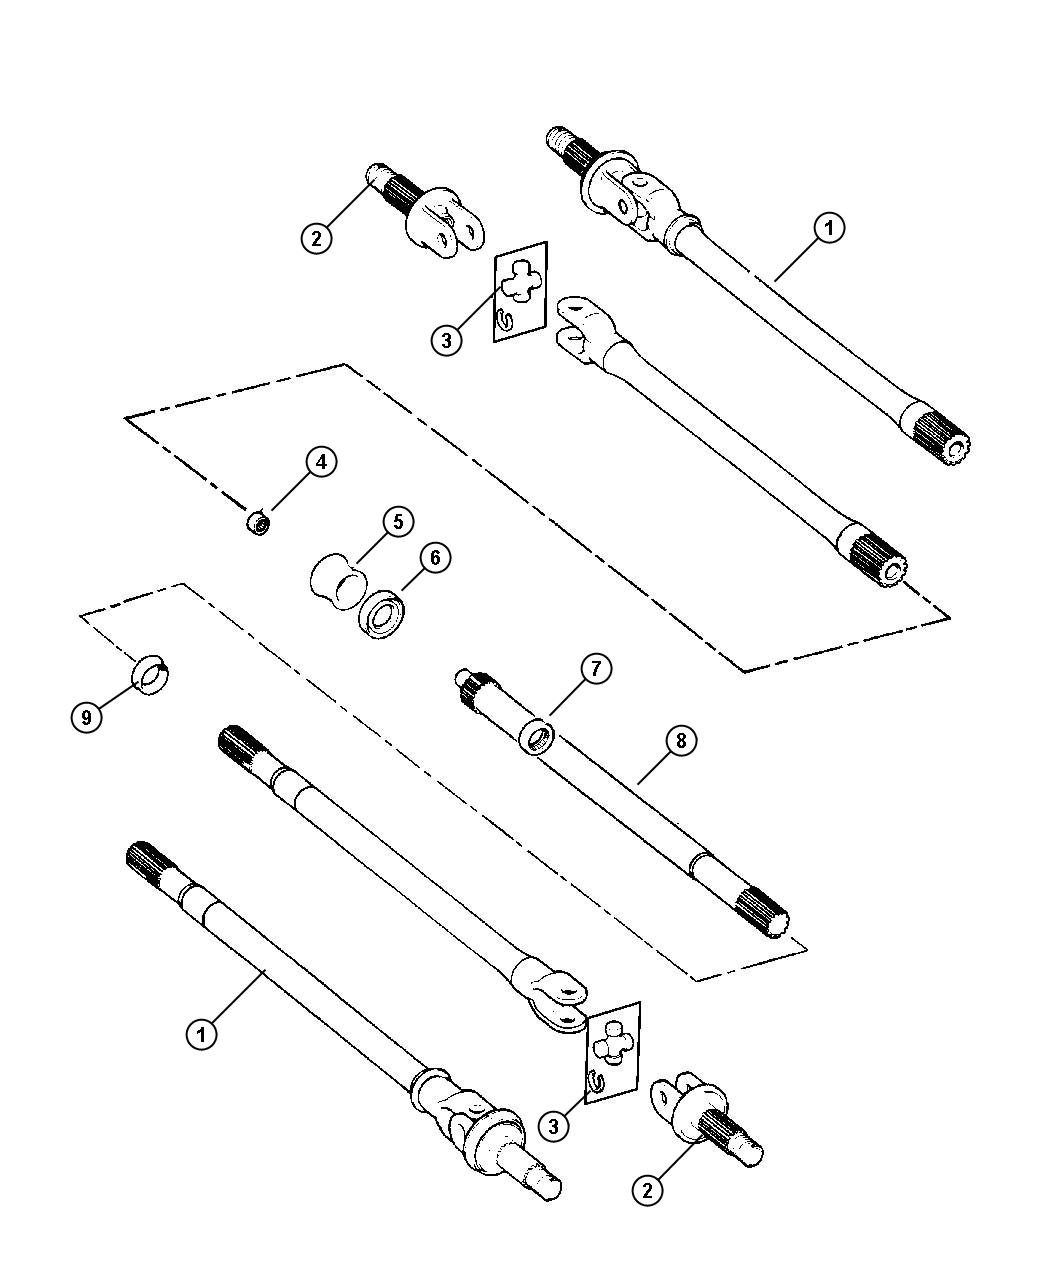 Diagram Front Axle Shafts,Dana M44/216MM [FRONT AXLE - DANA M44F / 216MM FBI],M60/248MM [FRONT AXLE - DANA M60F / 248MM FBI],BE 6,7,8. for your Dodge Ram 1500  